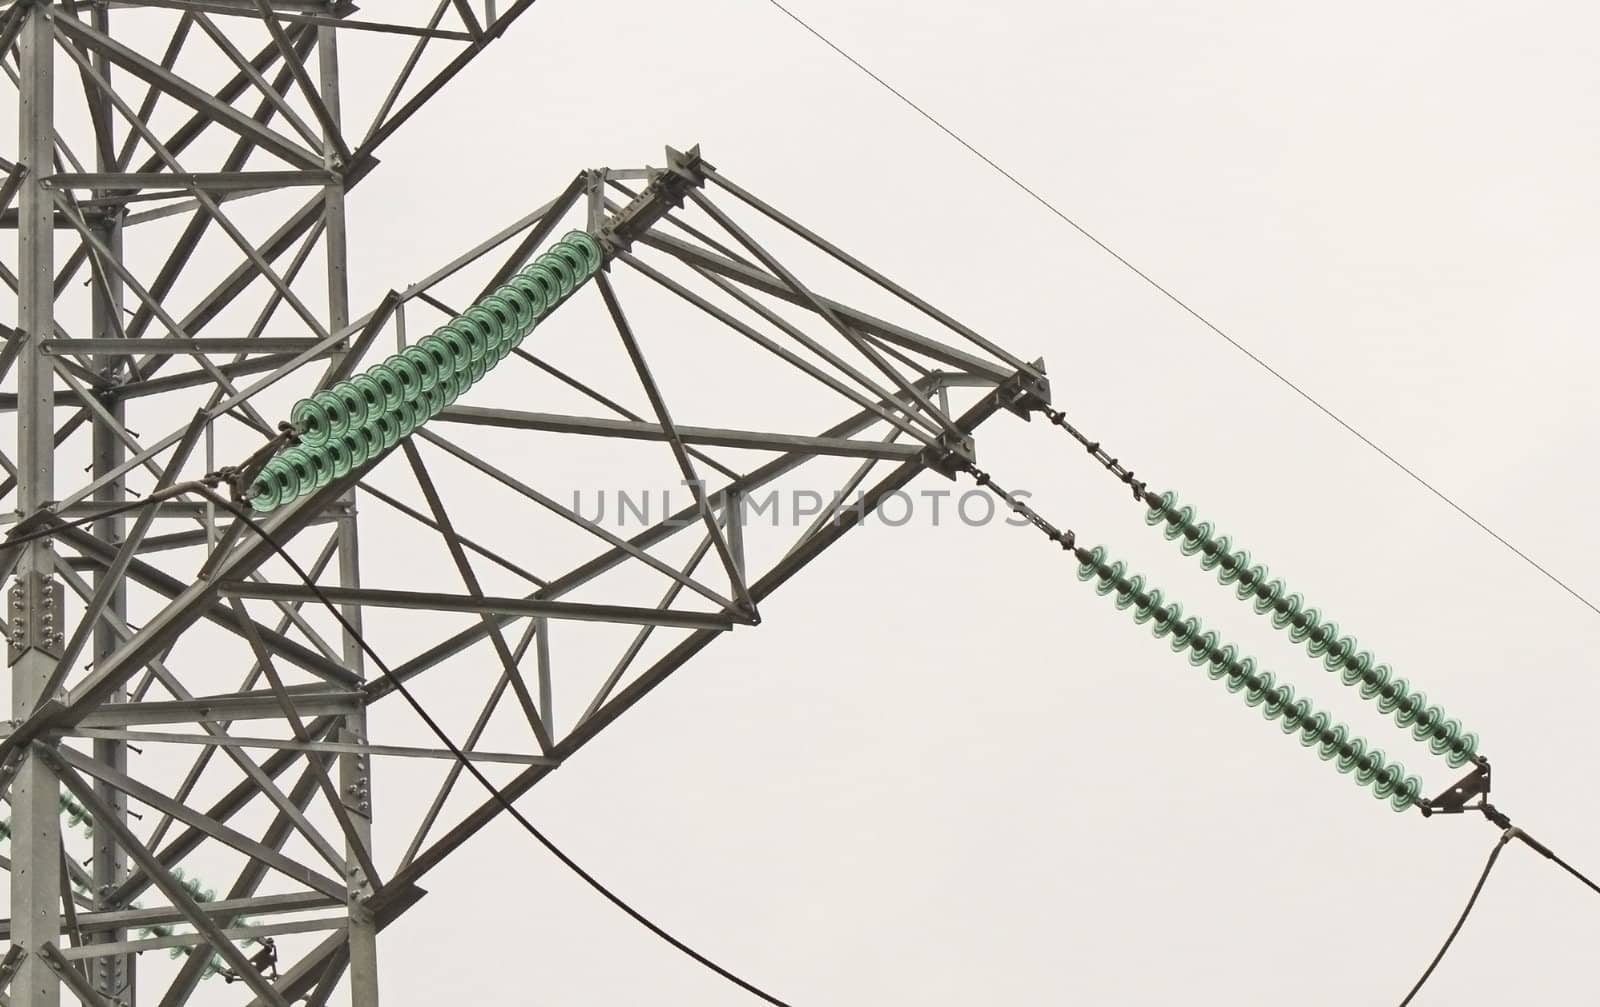 View of electricity pylon and power lines 